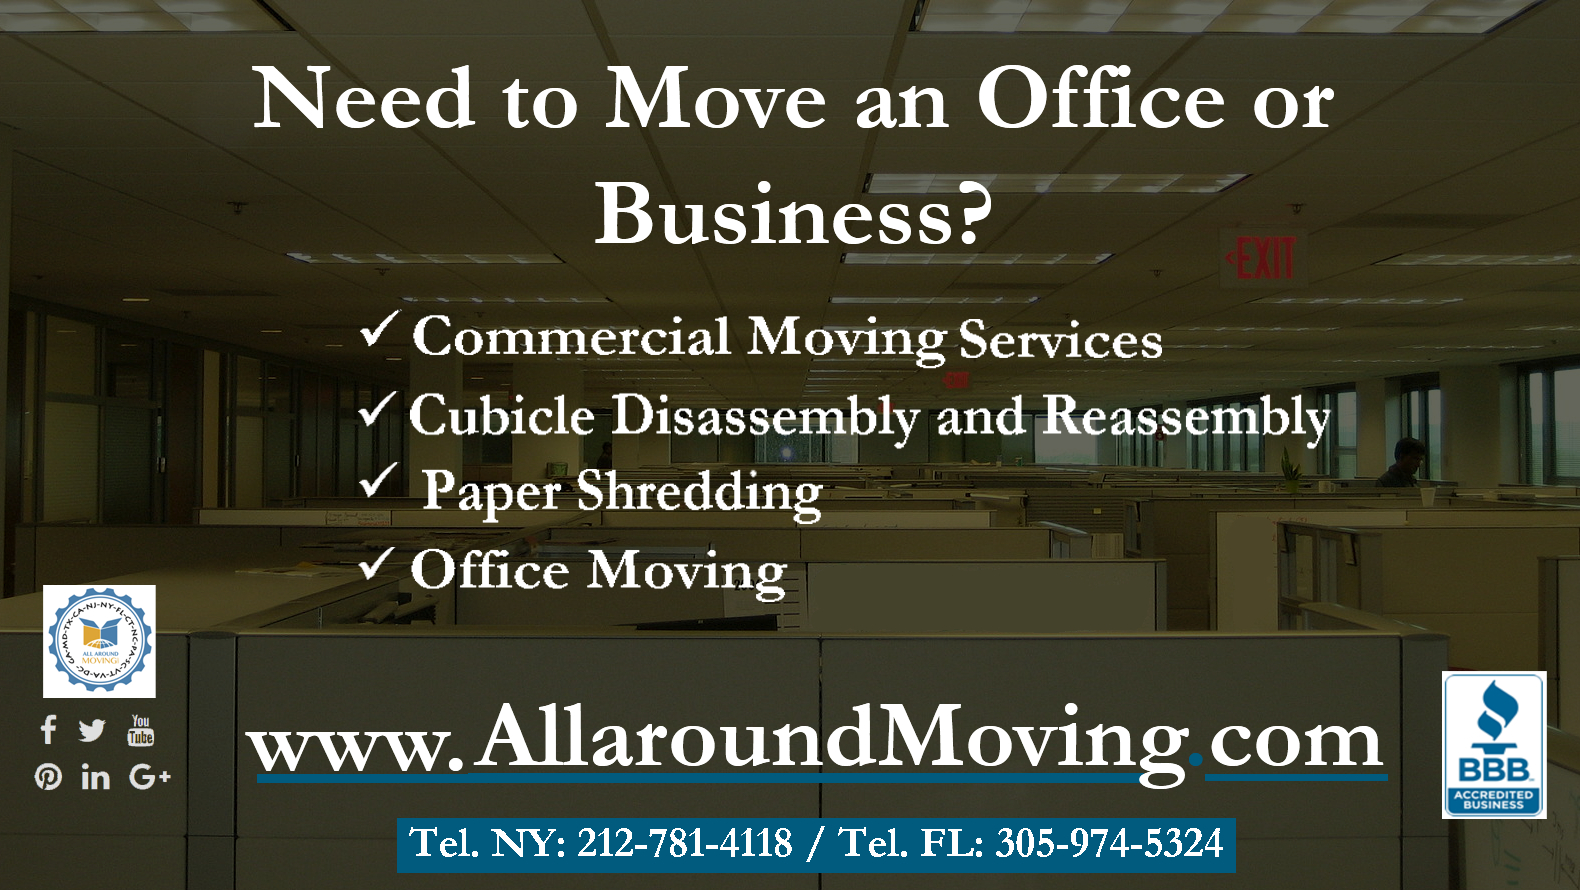 Need to Move an Office or Business? www.AllaroundMoving.com